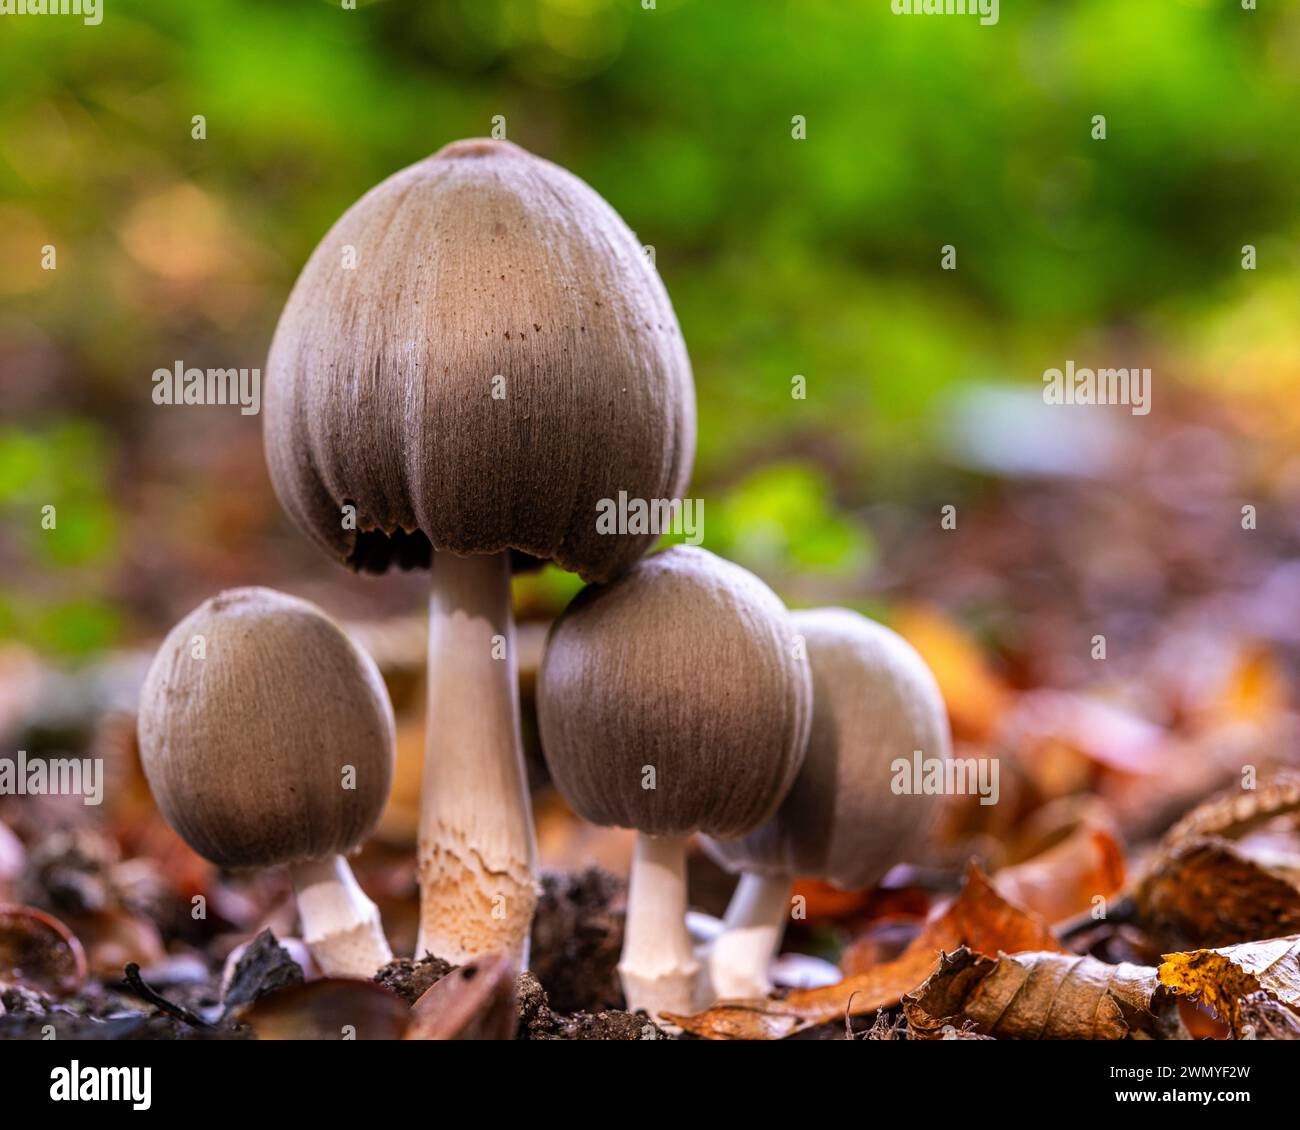 France, Somme, Forêt de Crécy, Crécy-en-Ponthieu, Mushrooms of the Crécy forest in autumn, Coprinus atramentarius Stock Photo